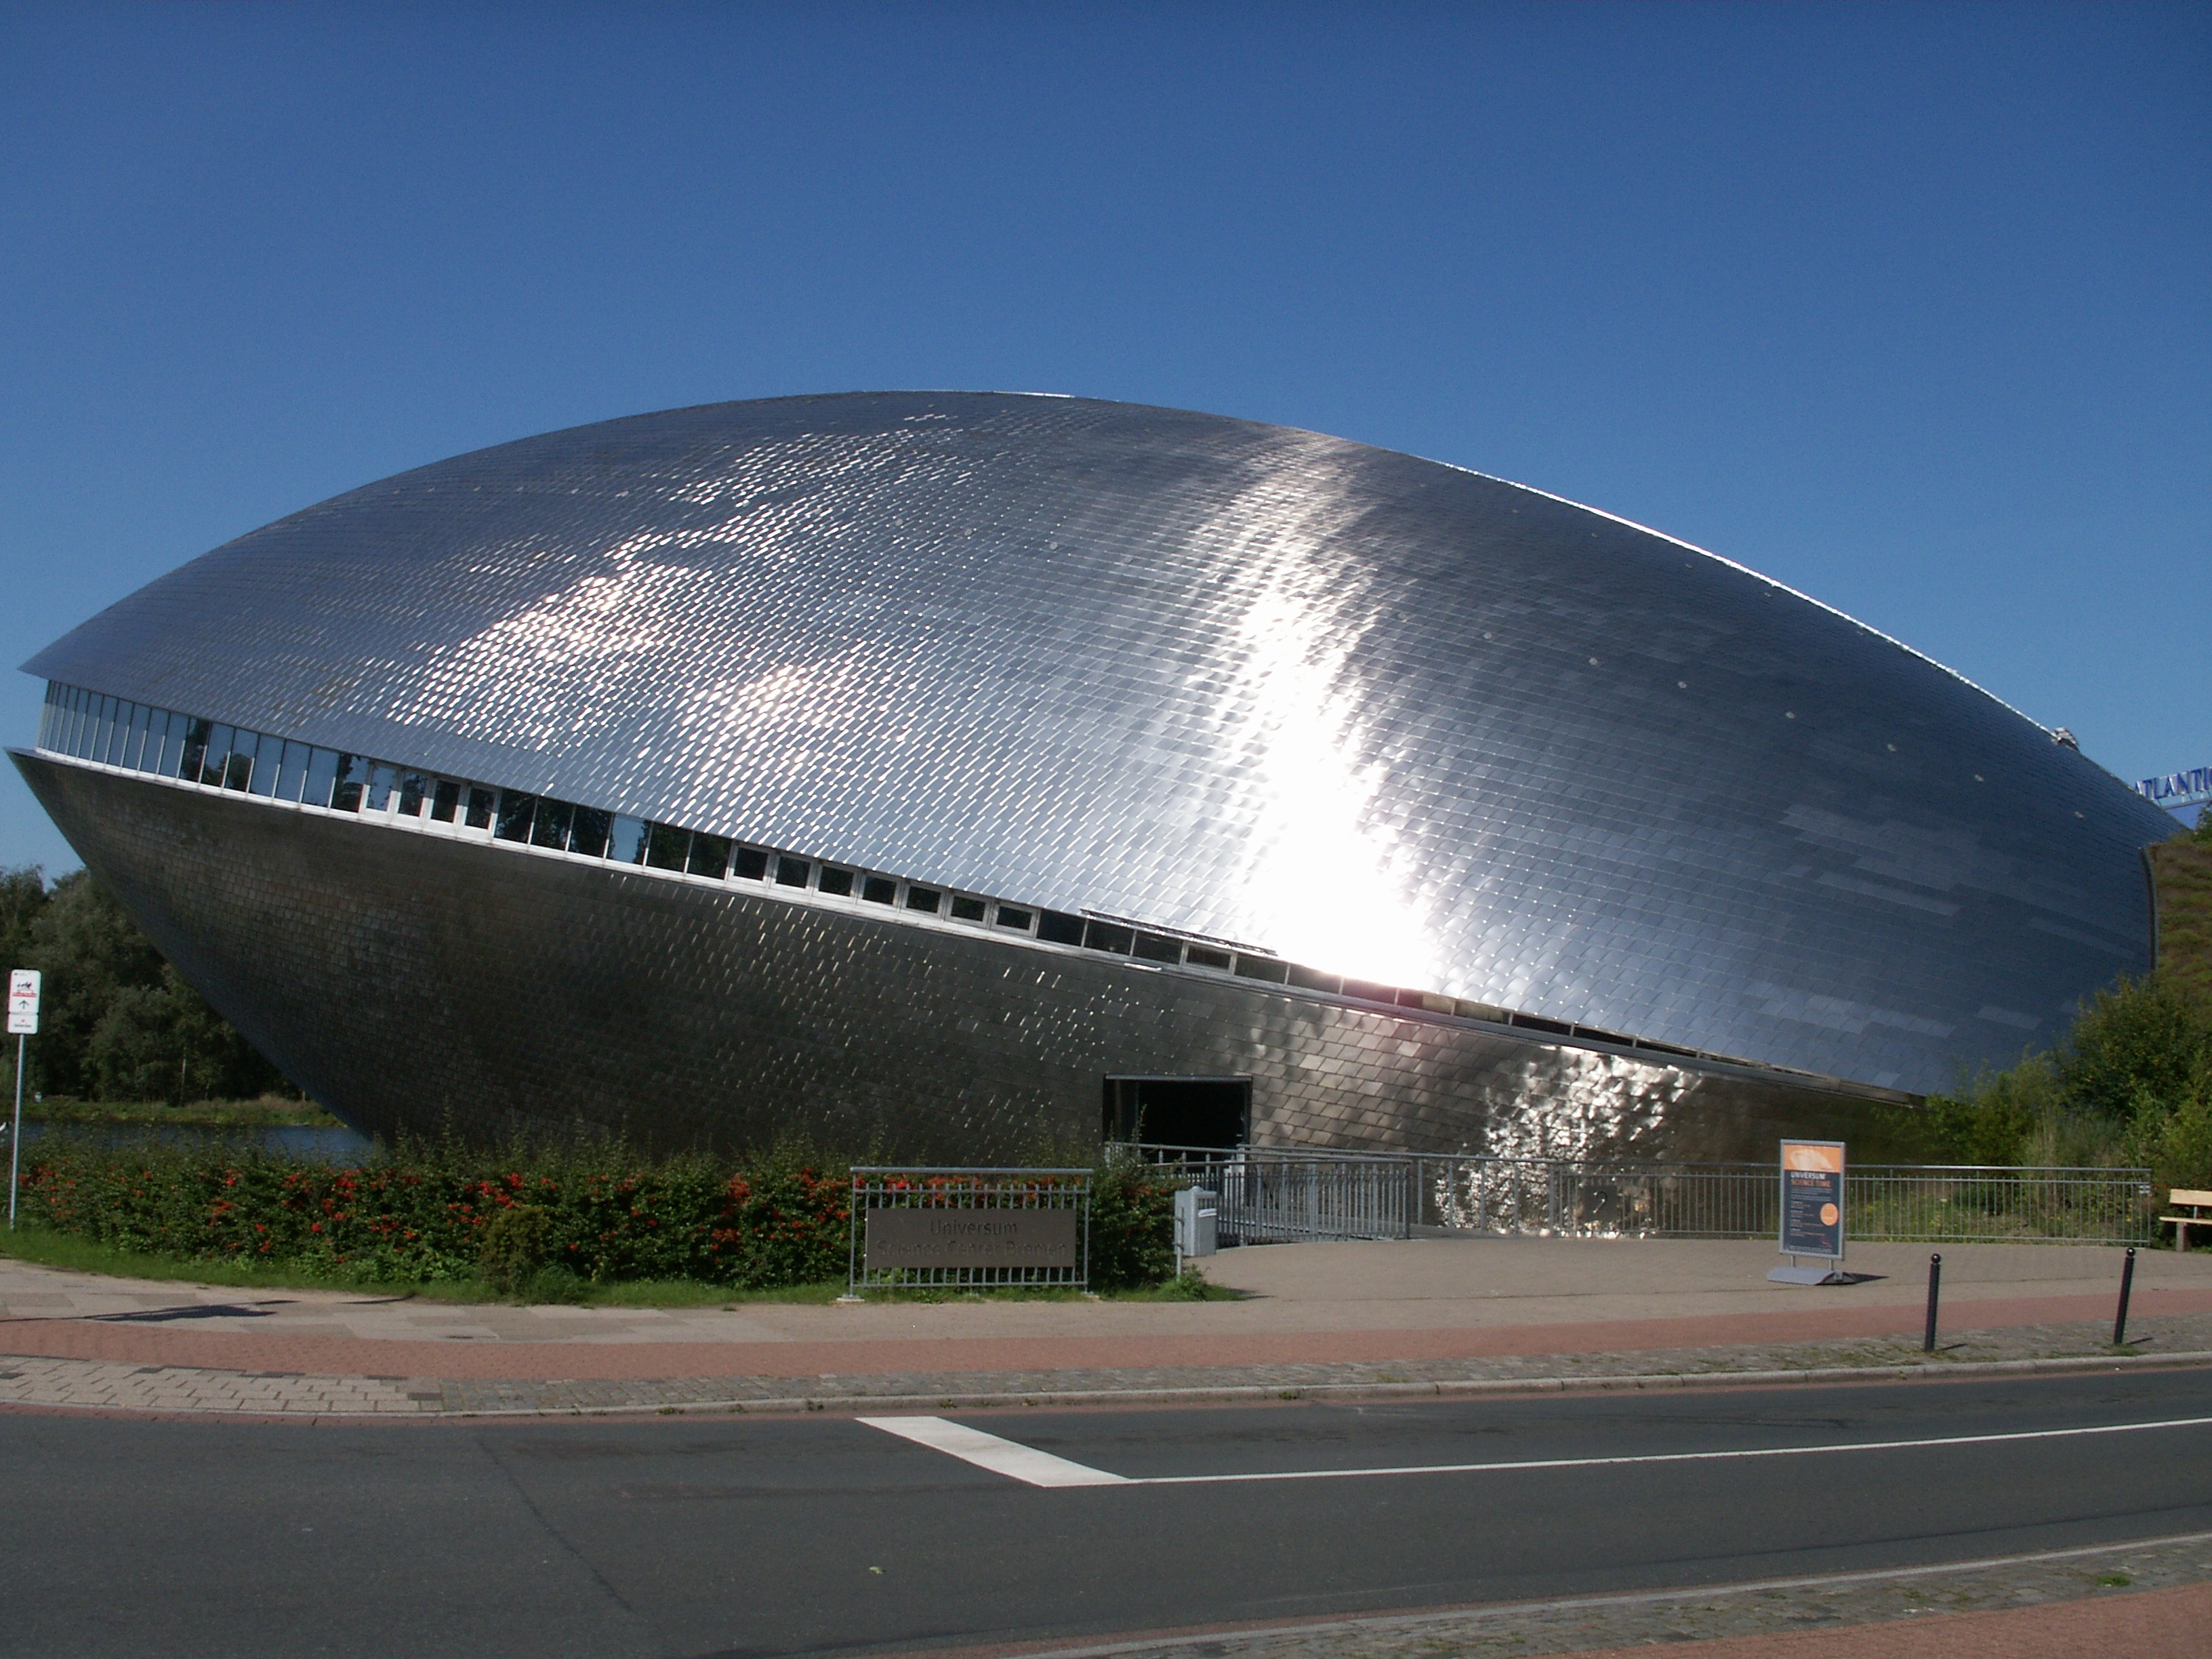 http://upload.wikimedia.org/wikipedia/commons/a/a3/Universum%C2%AE_Science_Center,_Bremen,_Germany.jpg